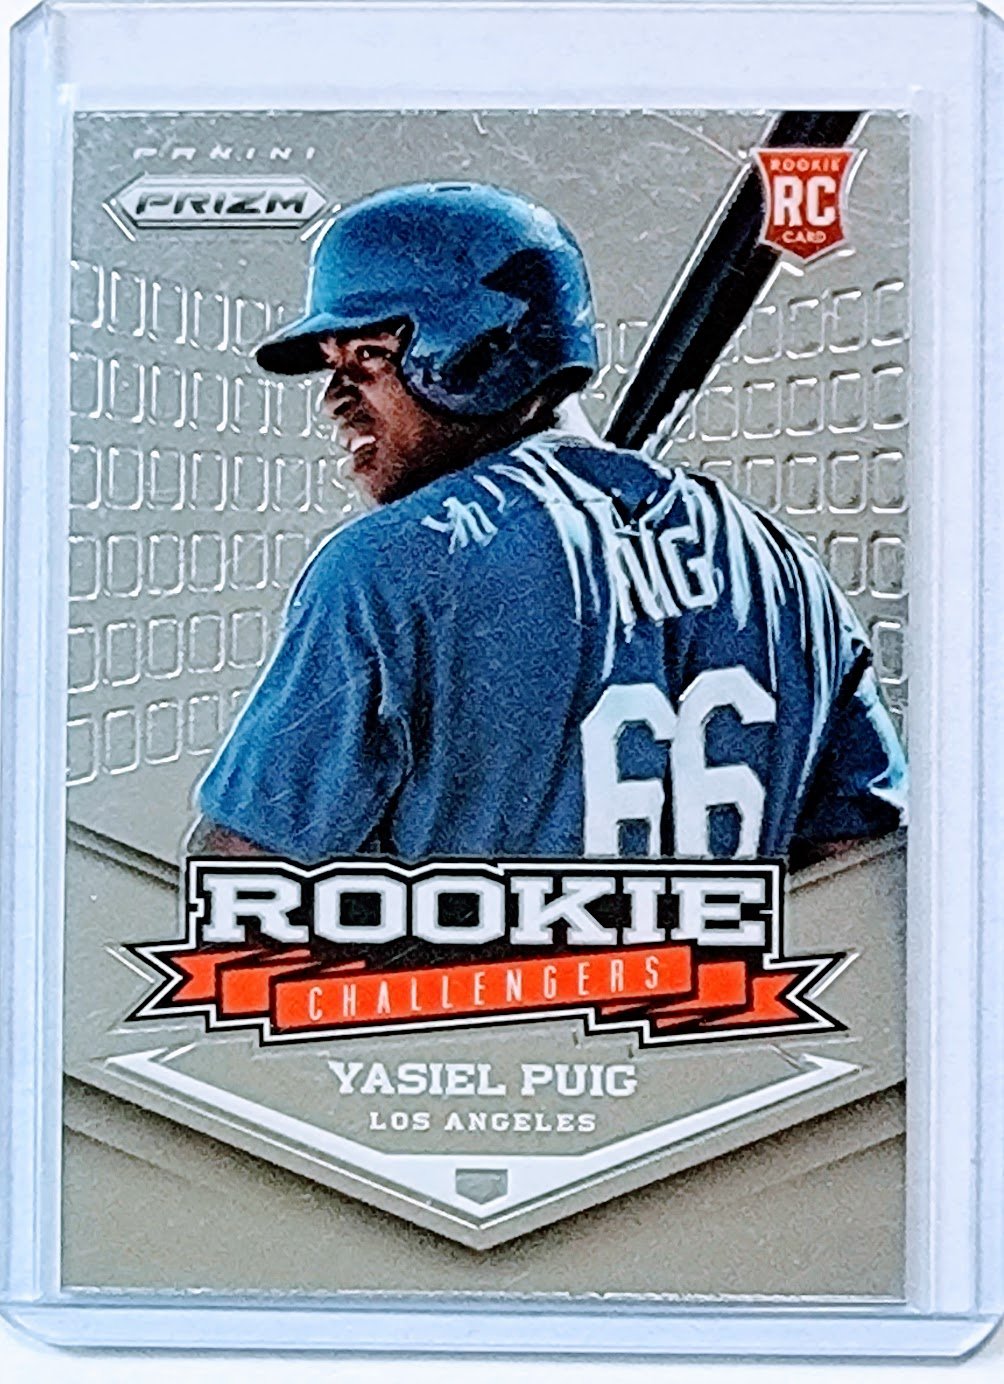 2013 Panini Prizm Yasiel Puig Rookie Challengers Baseball Trading Card TPTV simple Xclusive Collectibles   